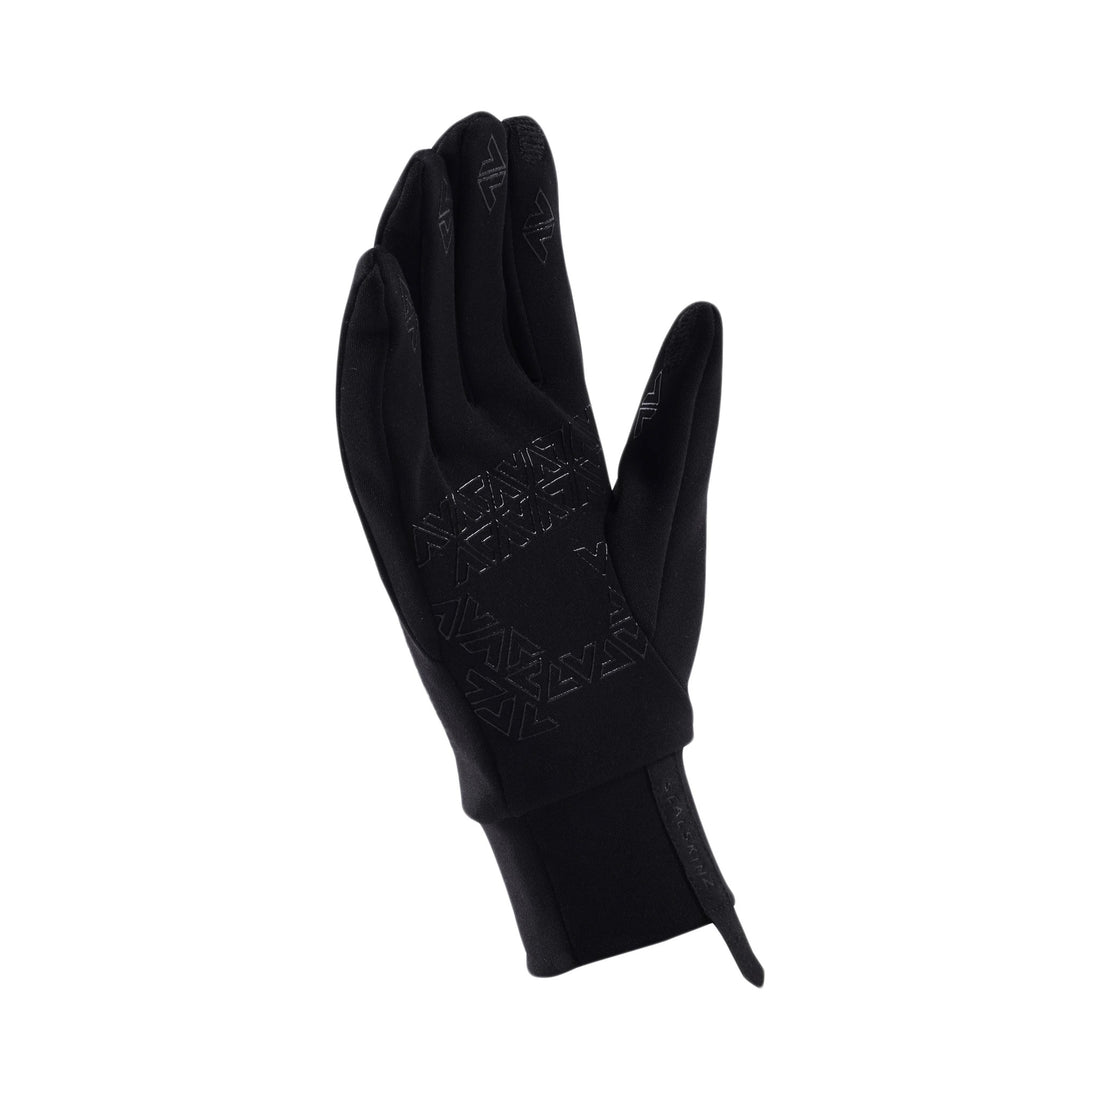 Water Repellant All Weather Glove - Black